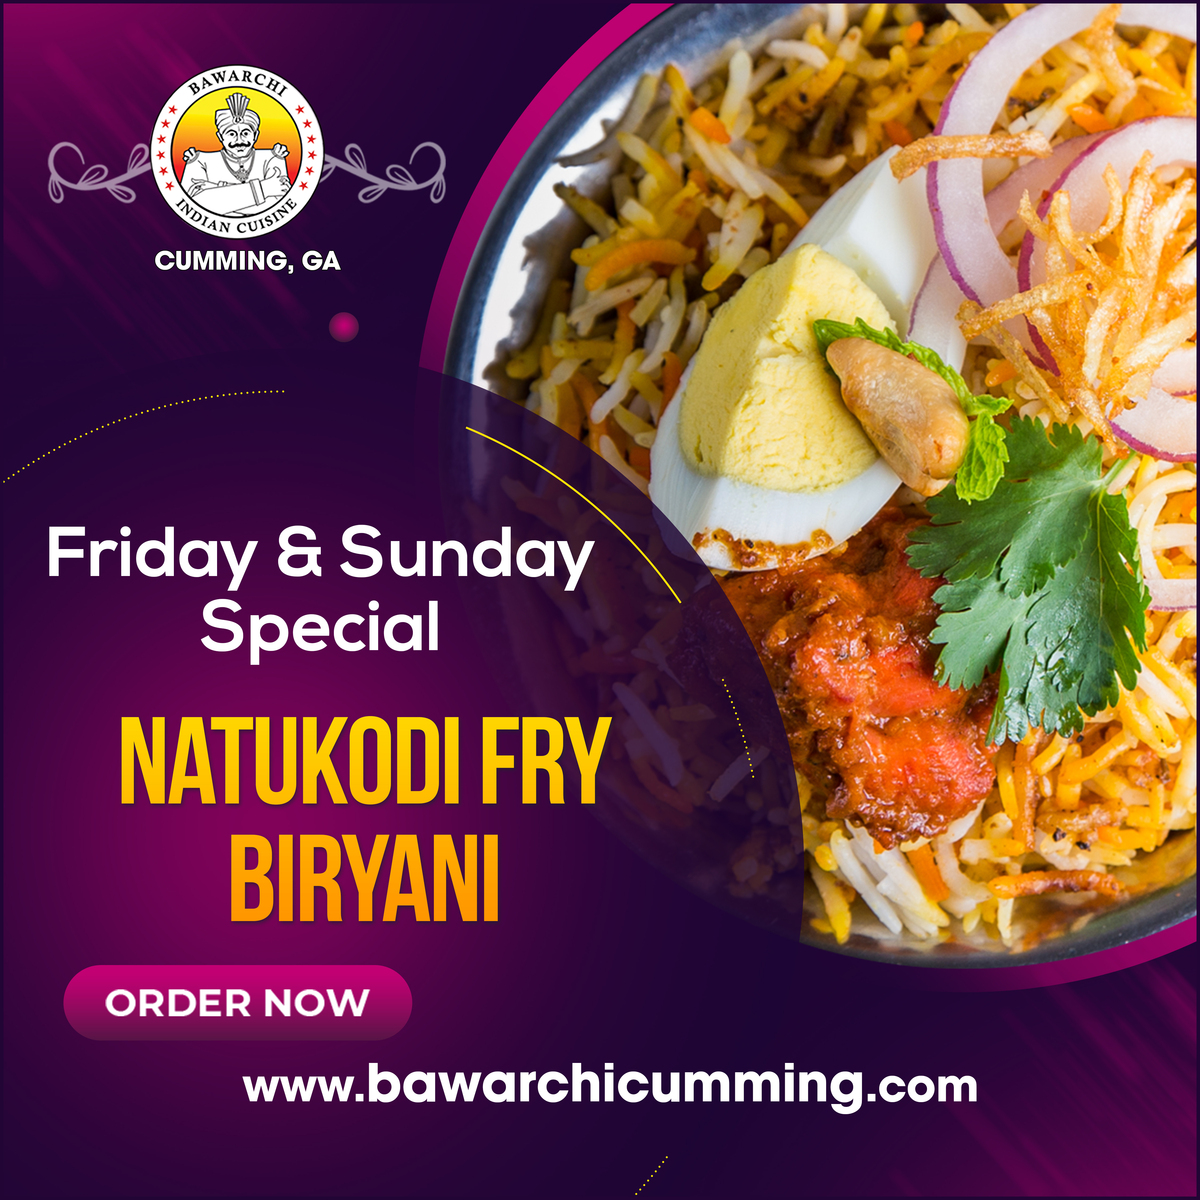 Let's end this week with a savor that bursts in the mouth with a great taste. This time we come in with sheer organic 'Natukodi Fry Biryani'🤗😋

Order Online📲: bit.ly/bawarchicumming

#BawarchiCumming #food #bawarchi #bawarchibiryani #biryaniexpert #BawarchiBiryaniCumming